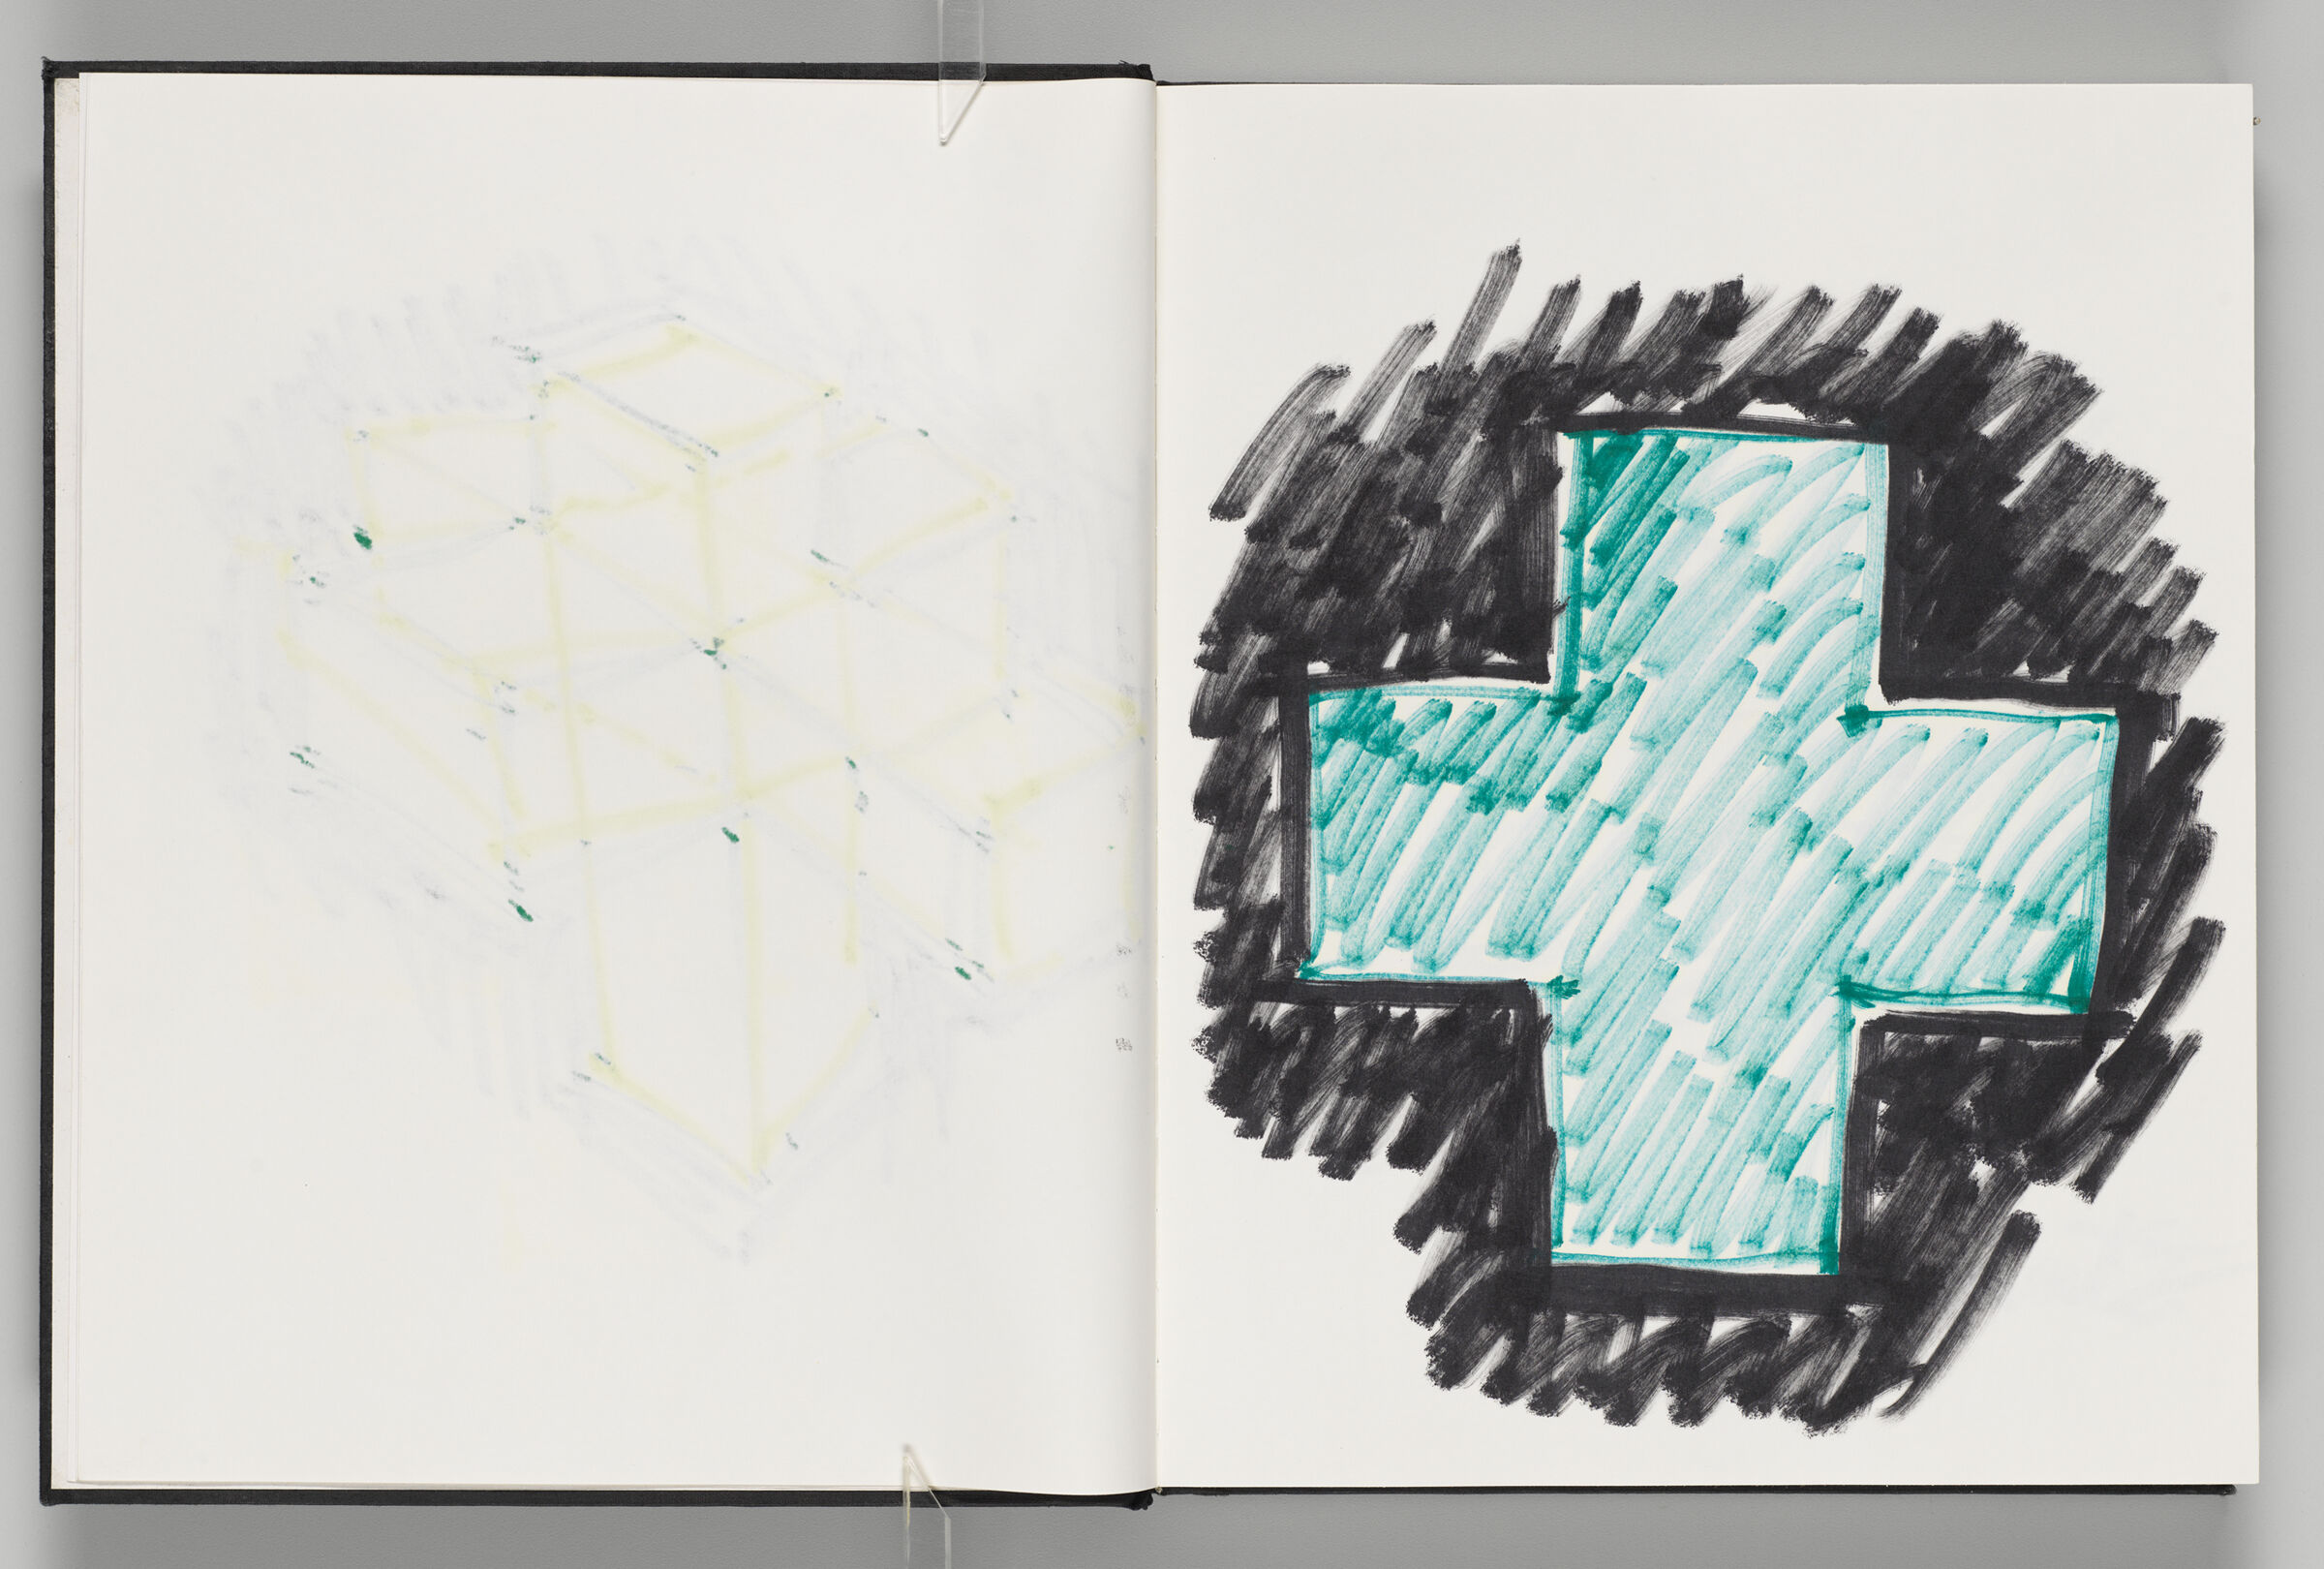 Untitled (Bleed-Through Of Previous Page, Left Page); Untitled (Sketch For Iba Symbol, Right Page)